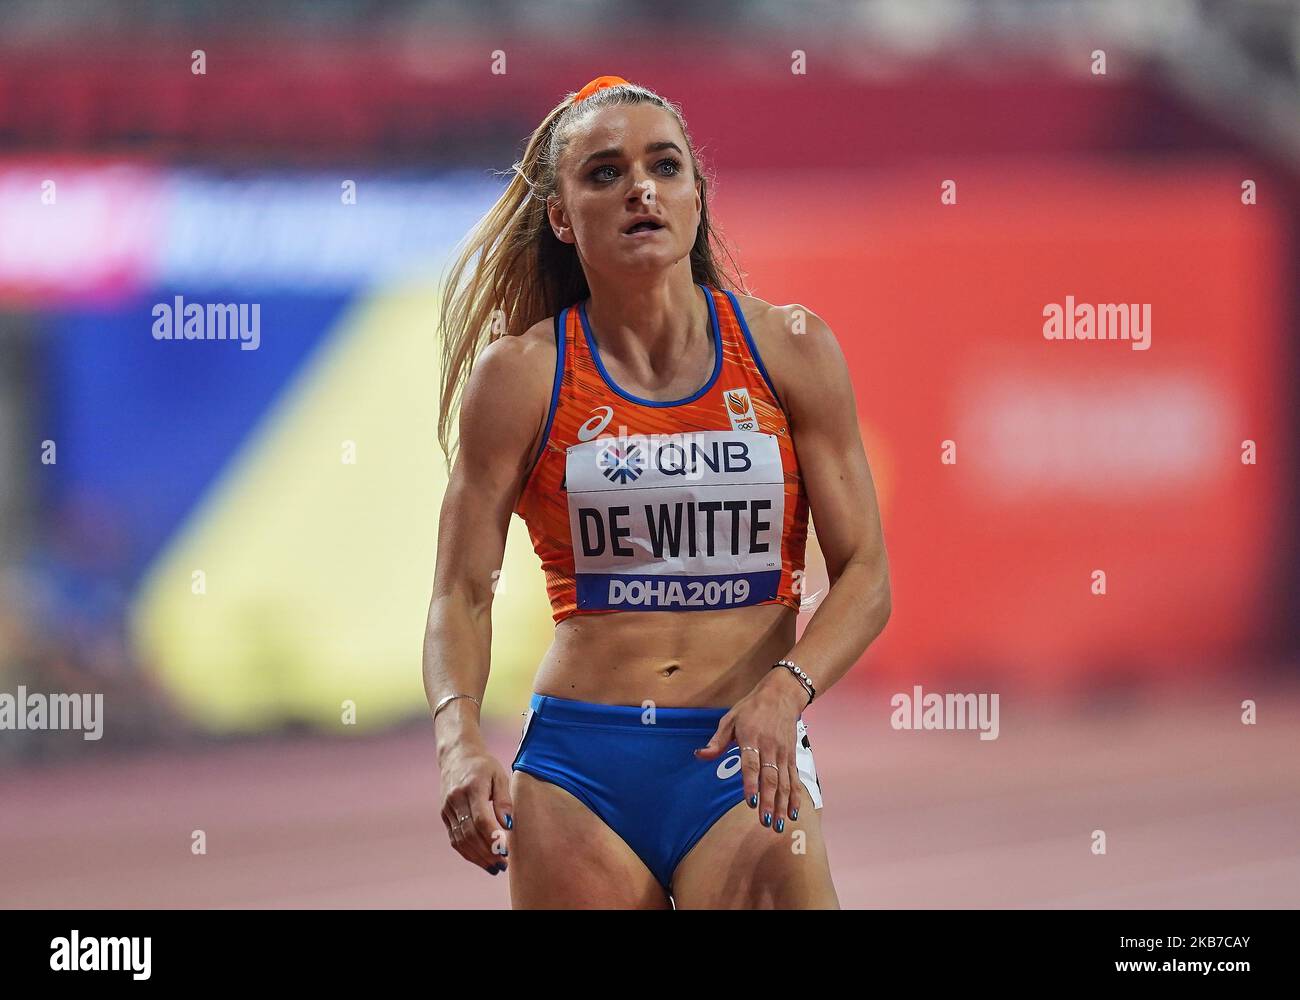 Lisanne De Witte of Netherlands competing in the 200 meter for women during the 17th IAAF World Athletics Championships at the Khalifa Stadium in Doha, Qatar on October 1, 2019. (Photo by Ulrik Pedersen/NurPhoto) Stock Photo